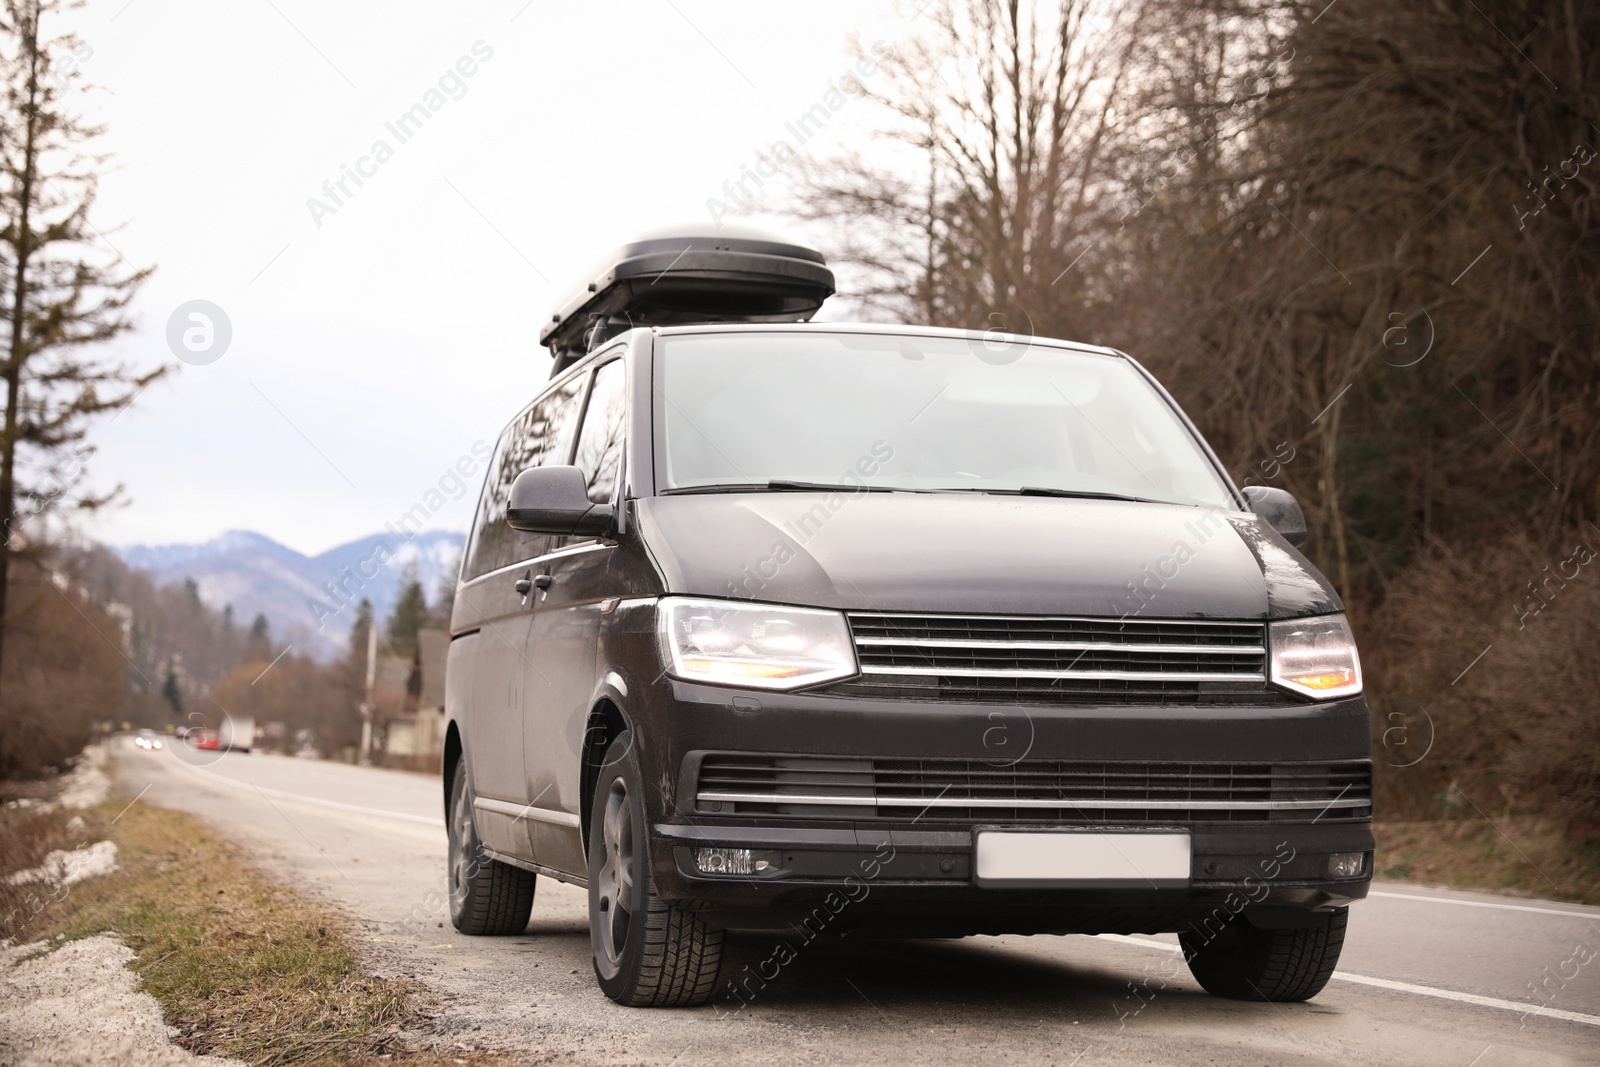 Photo of Black car with roof rack on road. Seasonal vacation